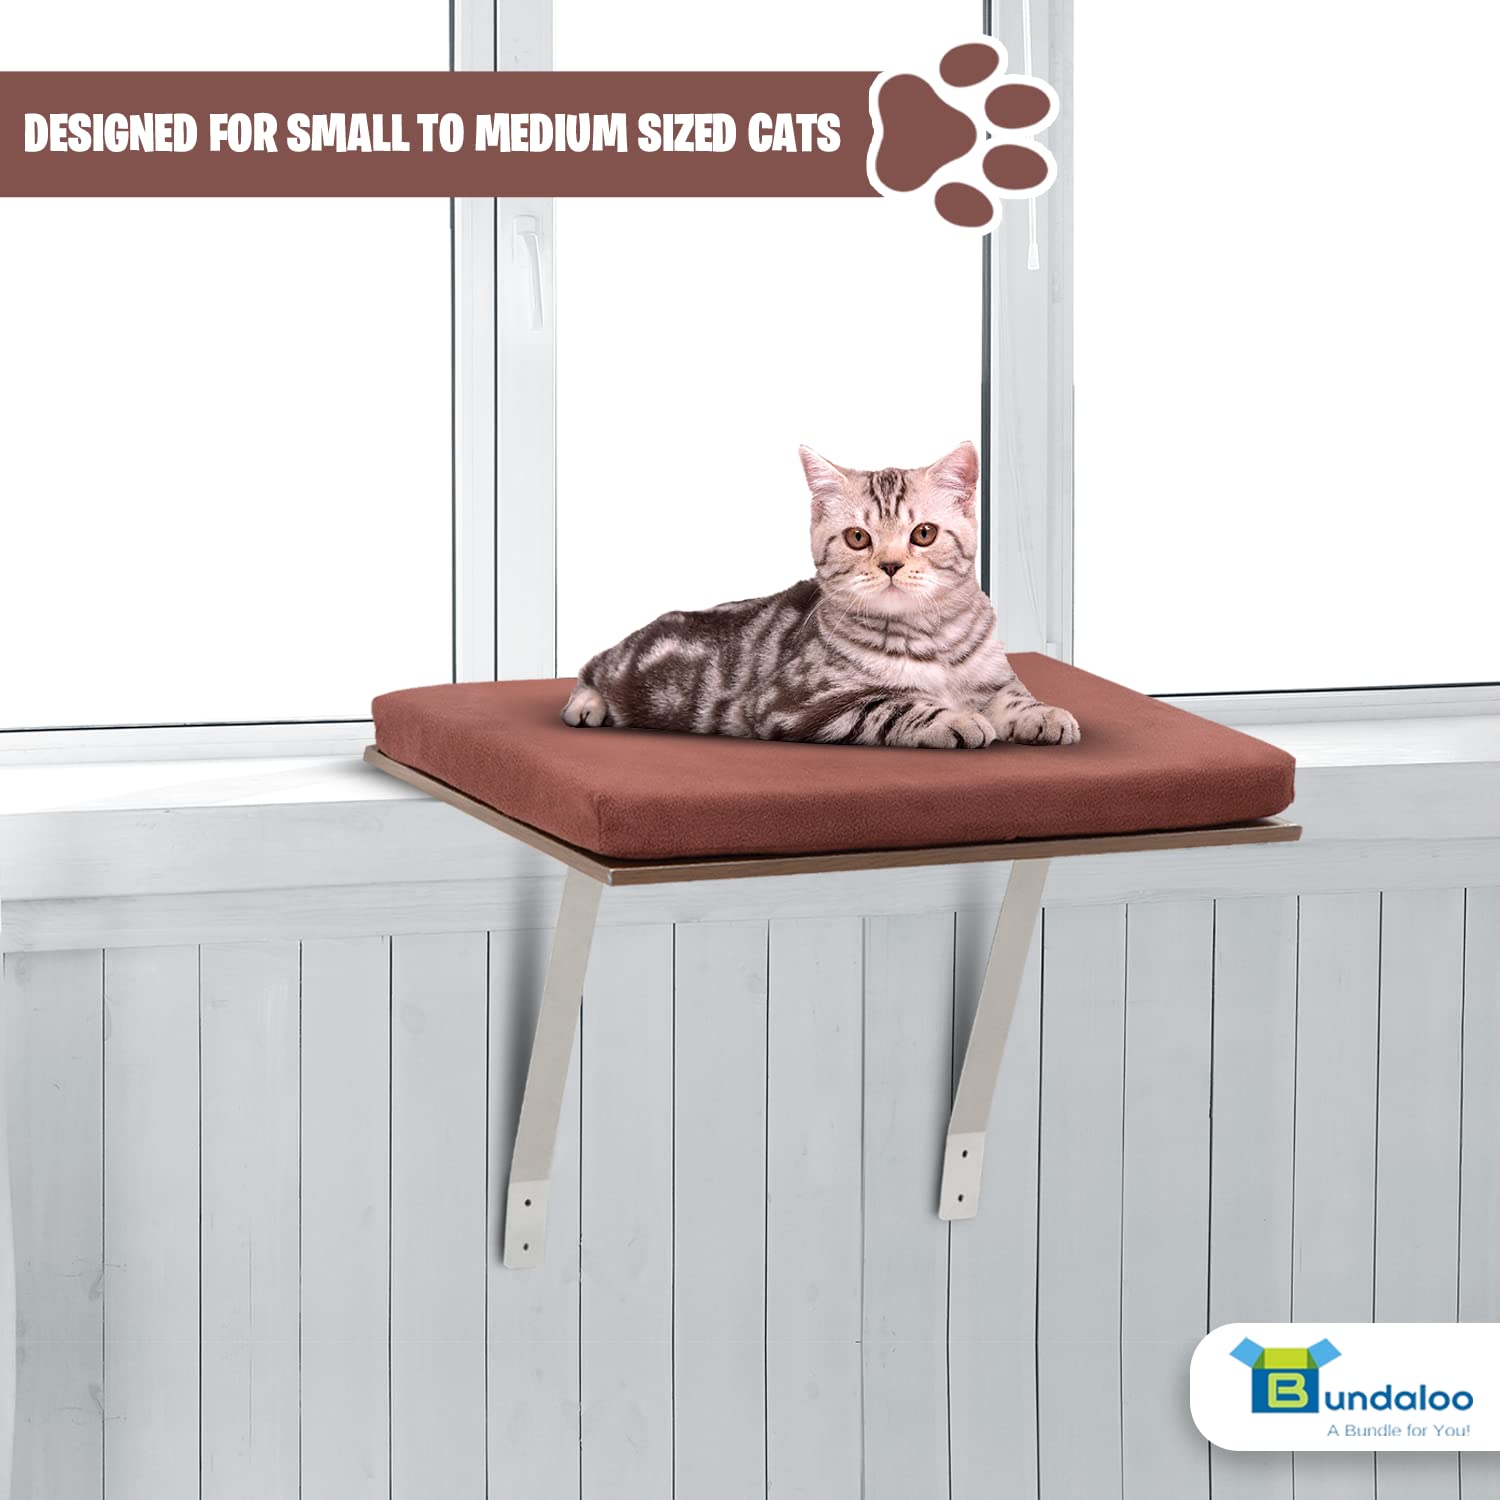 Bundaloo Cat Window Perch Seat with Washable Removable Cover (Small - Medium)  - Very Good